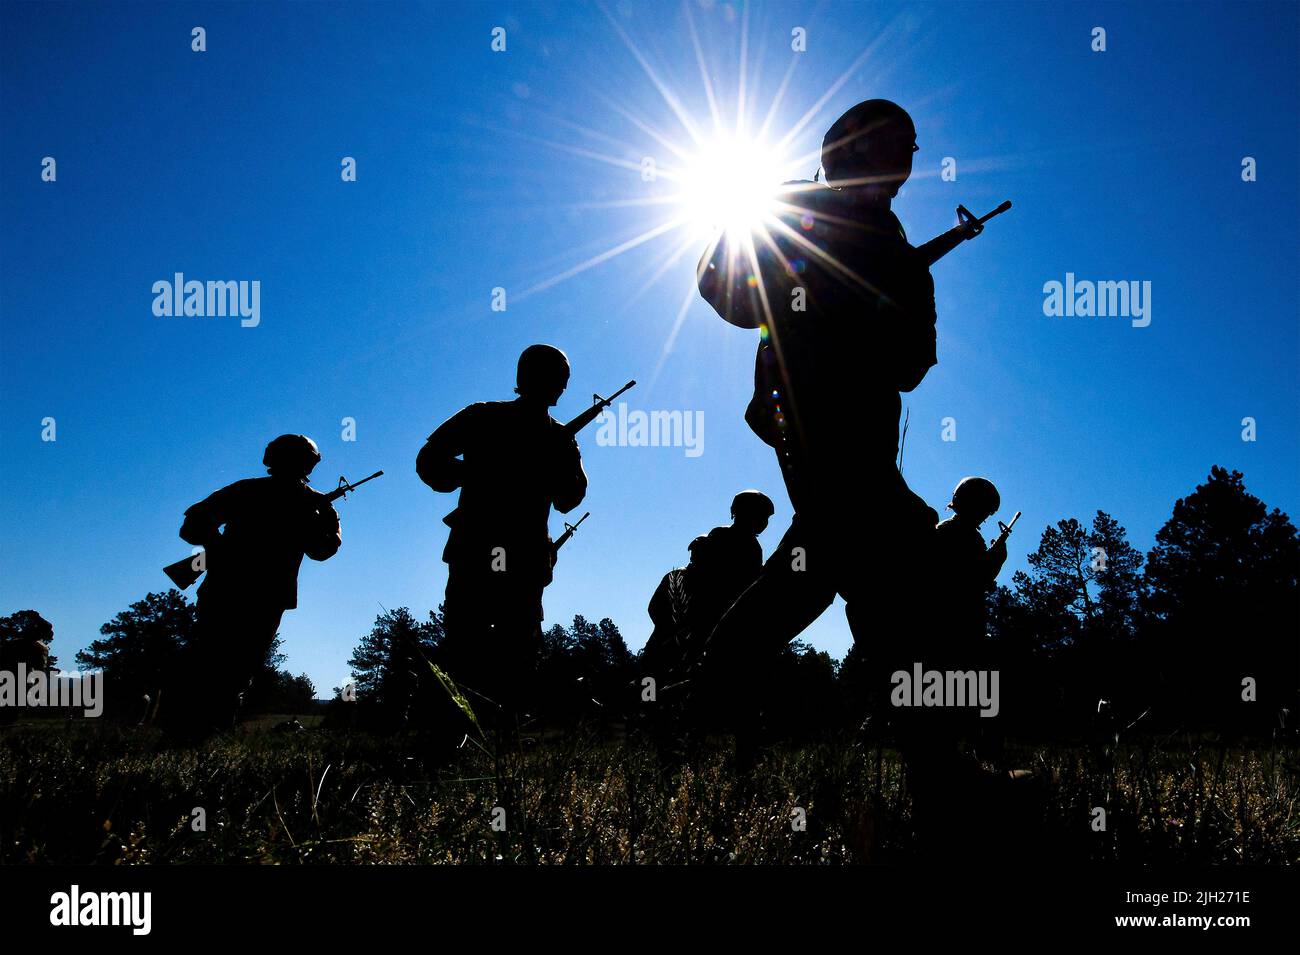 Colorado Springs, United States of America. 12 July, 2022. U.S. Air Force Academy students are silhouetted by the summer sun during the Basic Cadet Training assault course at the Air Force Academy Jacks Valley, July 12, 2022 in Colorado Springs, Colorado. Basic Cadet Training is a six-week indoctrination program to transformation civilian students into military academy cadets. Credit: Trevor Cokley/US Air Force Photo/Alamy Live News Stock Photo